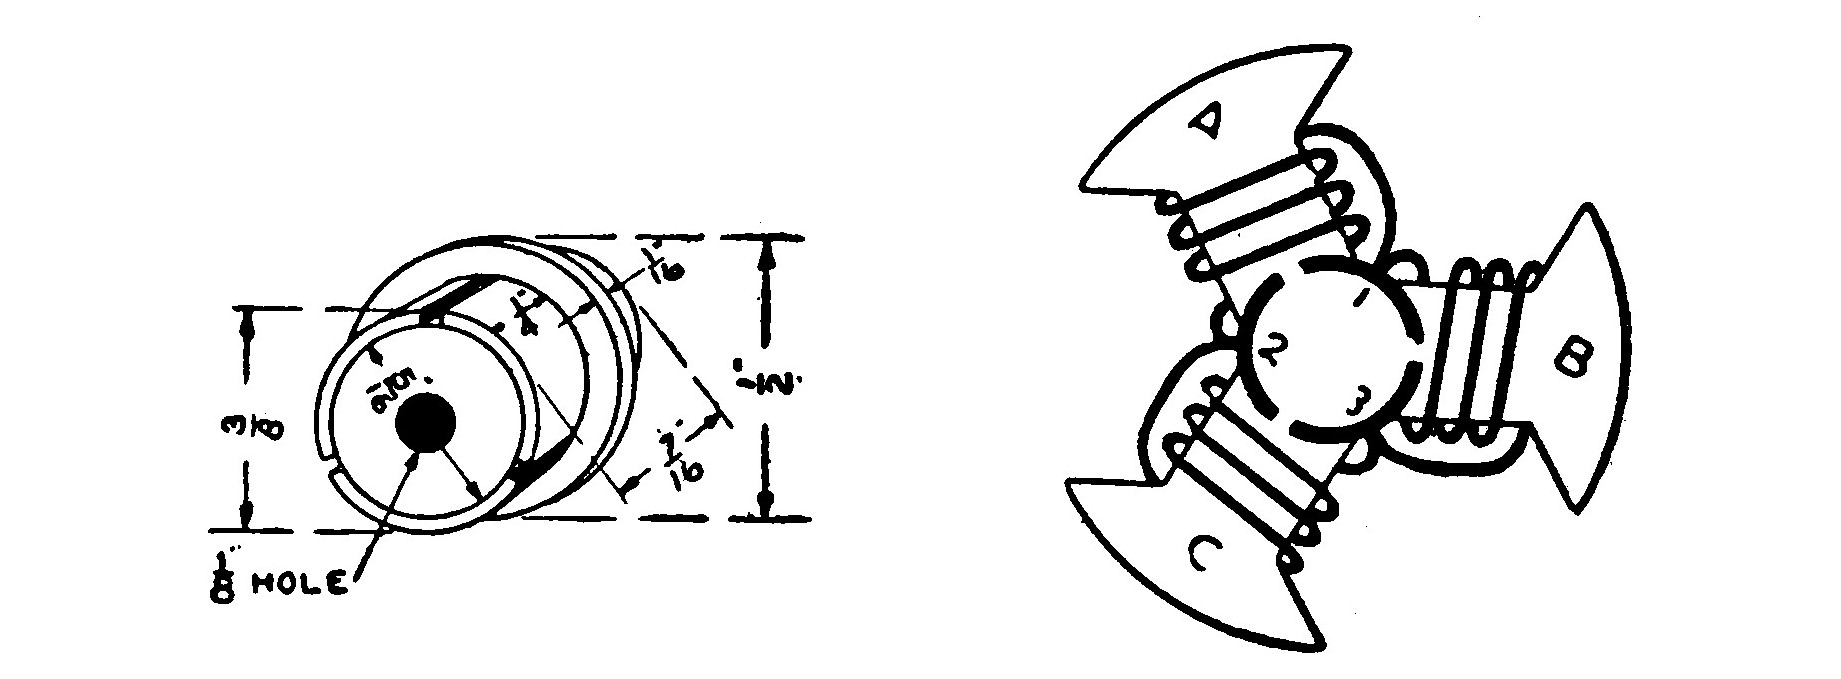 FIG. 45—The Commutator and Method of connecting the Armature Coils.